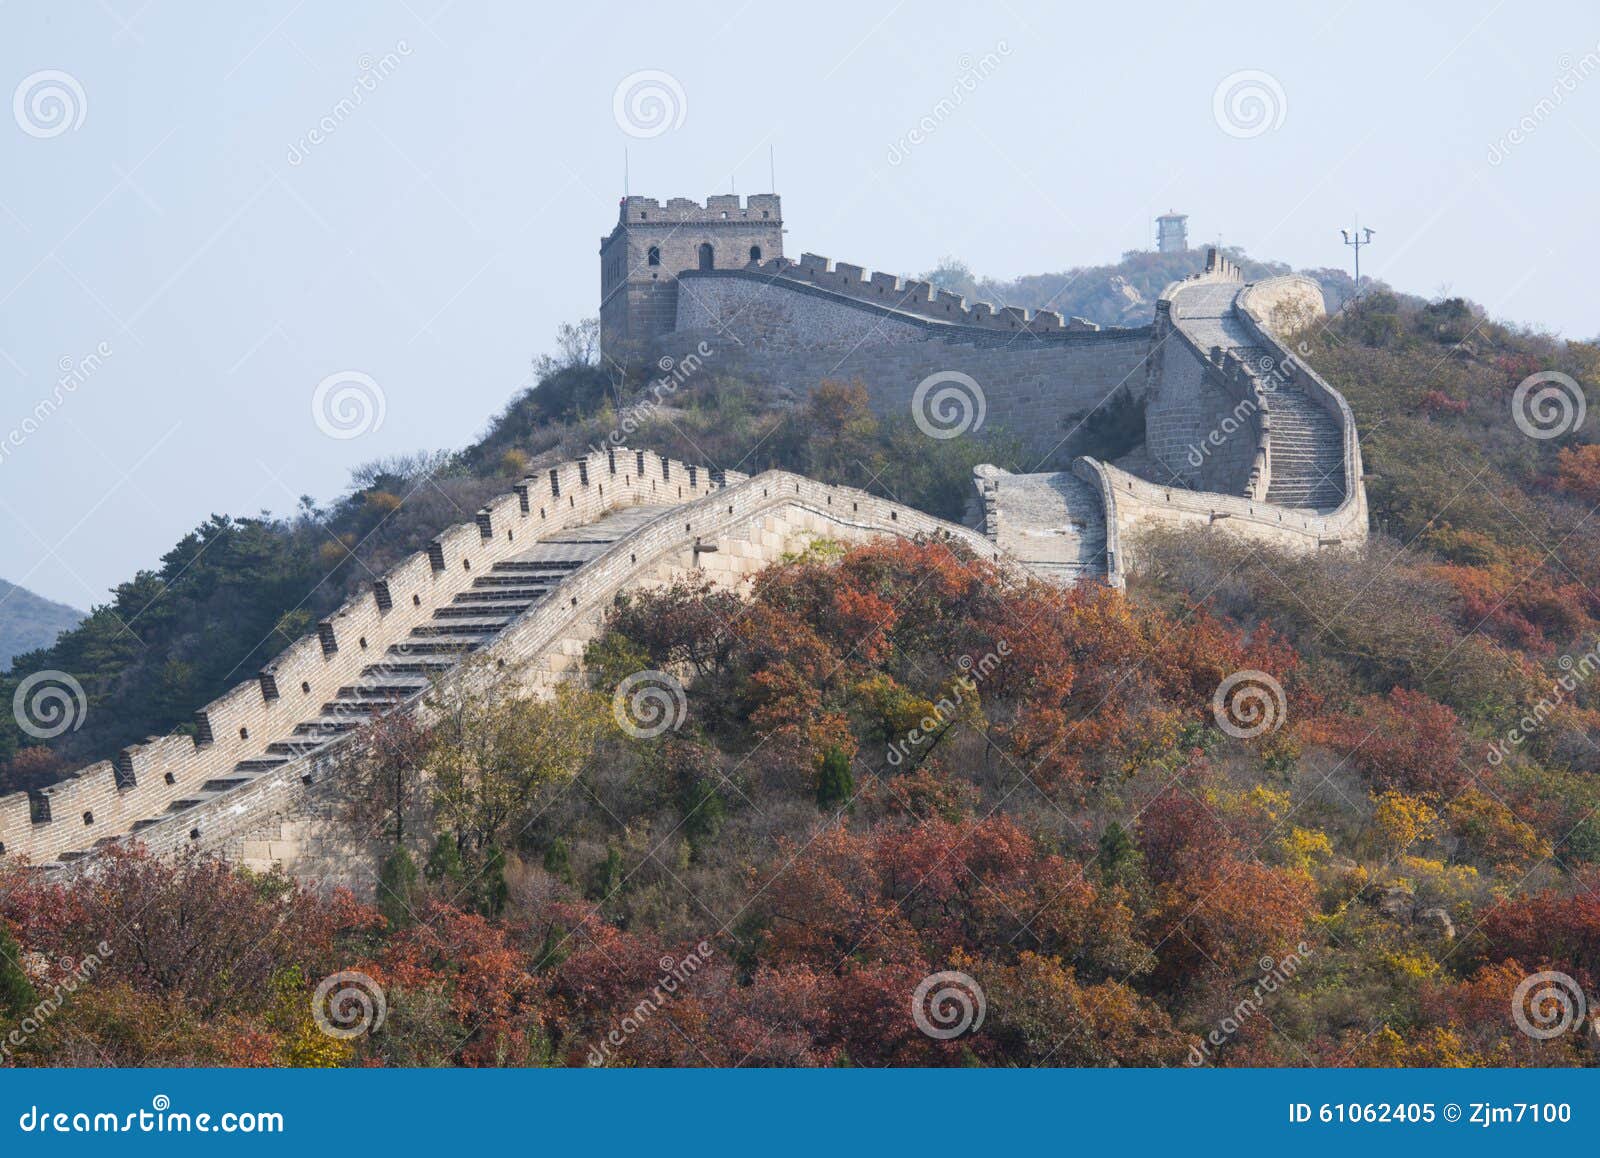 asia china, beijing, badaling national forest park, the great wall, red leaves